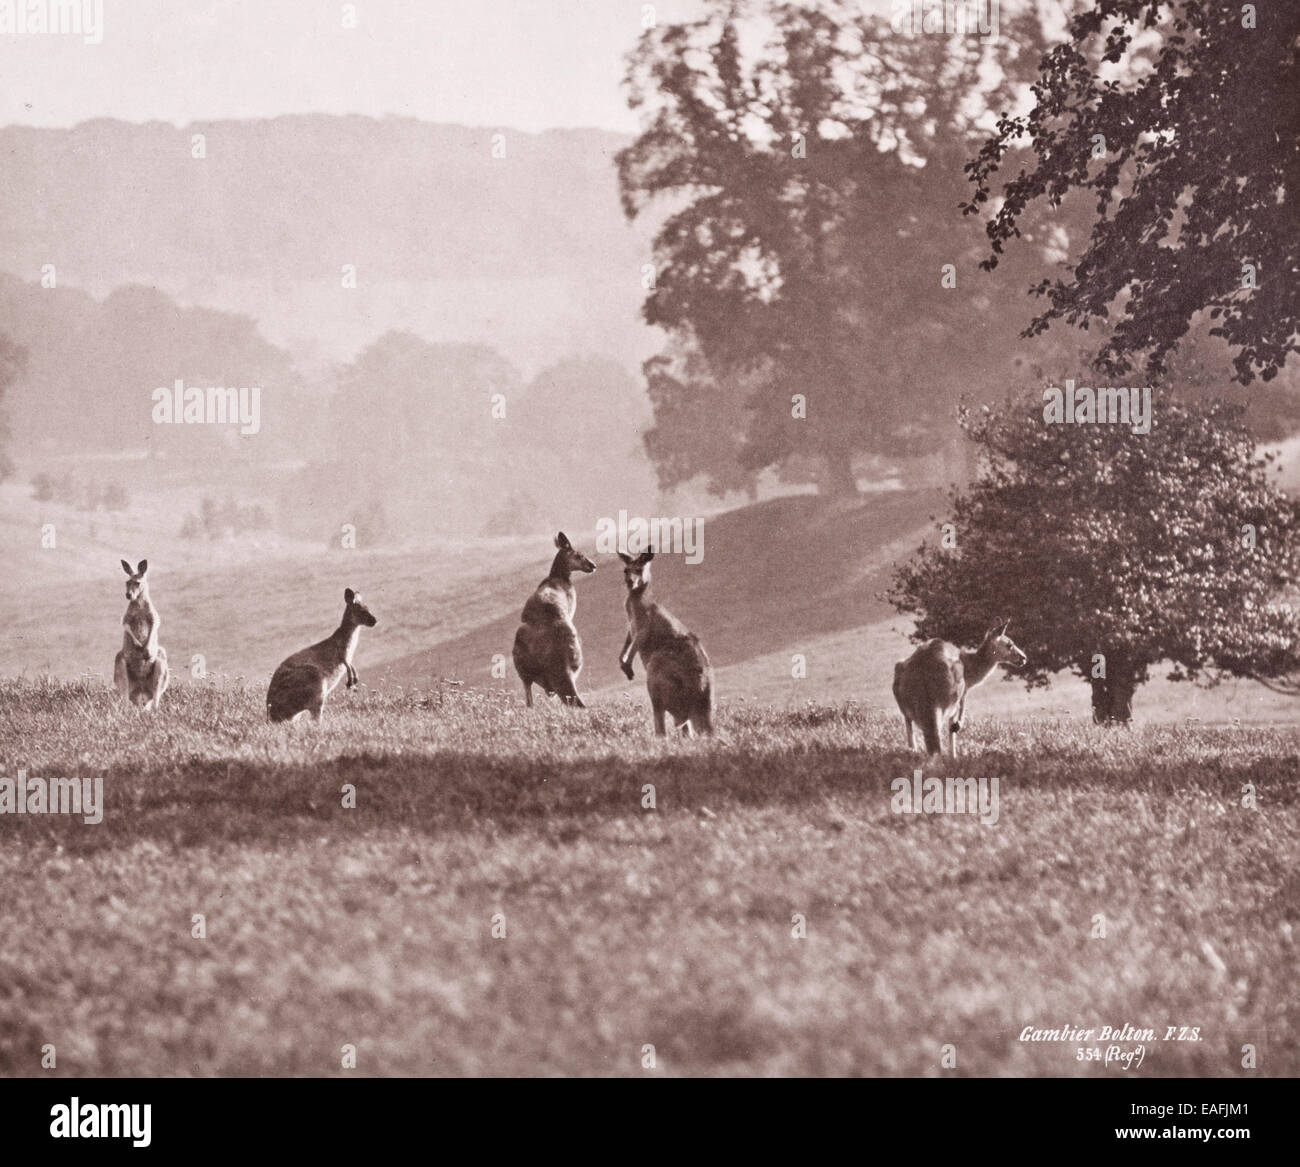 Group of Kangaroos by Gambier Bolton Stock Photo